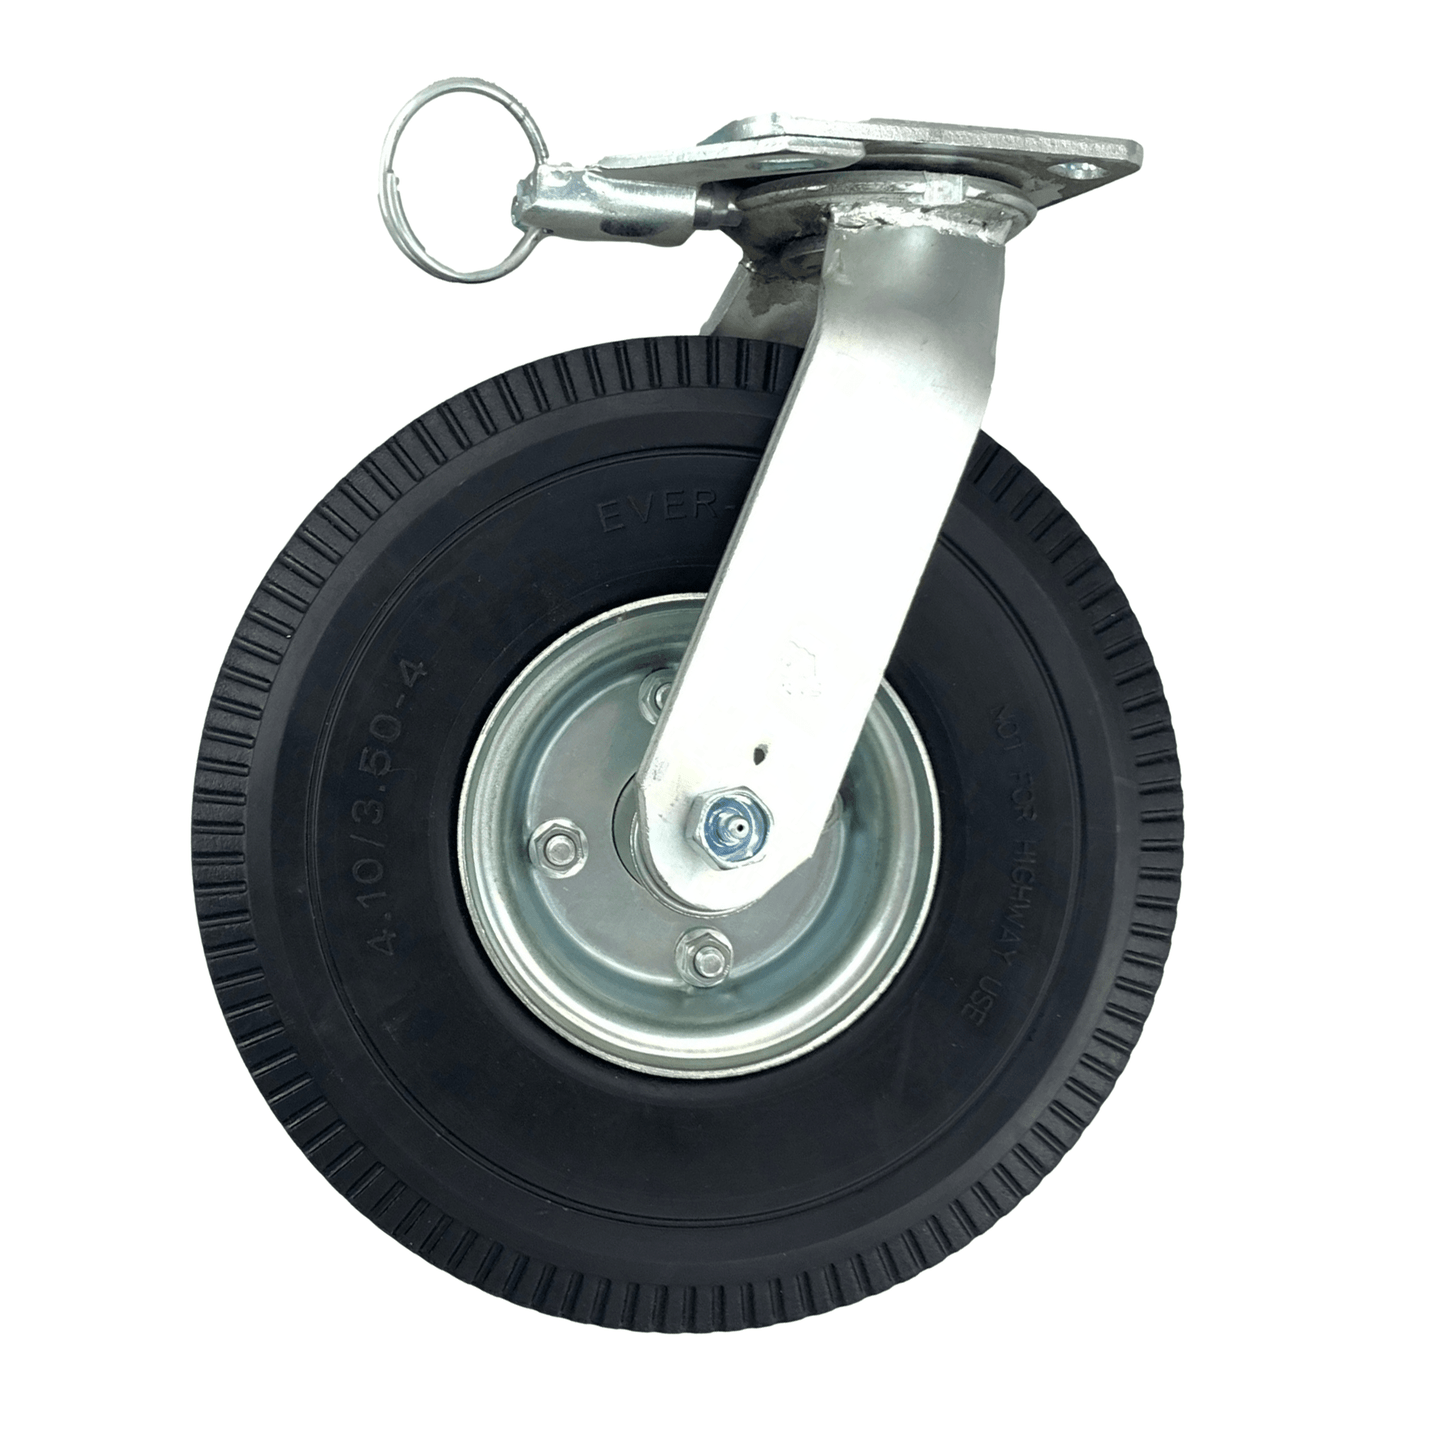 10" x 3" Ever-Roll Flat Free Wheel Swivel Caster - 280 lbs. Capacity - Durable Superior Casters